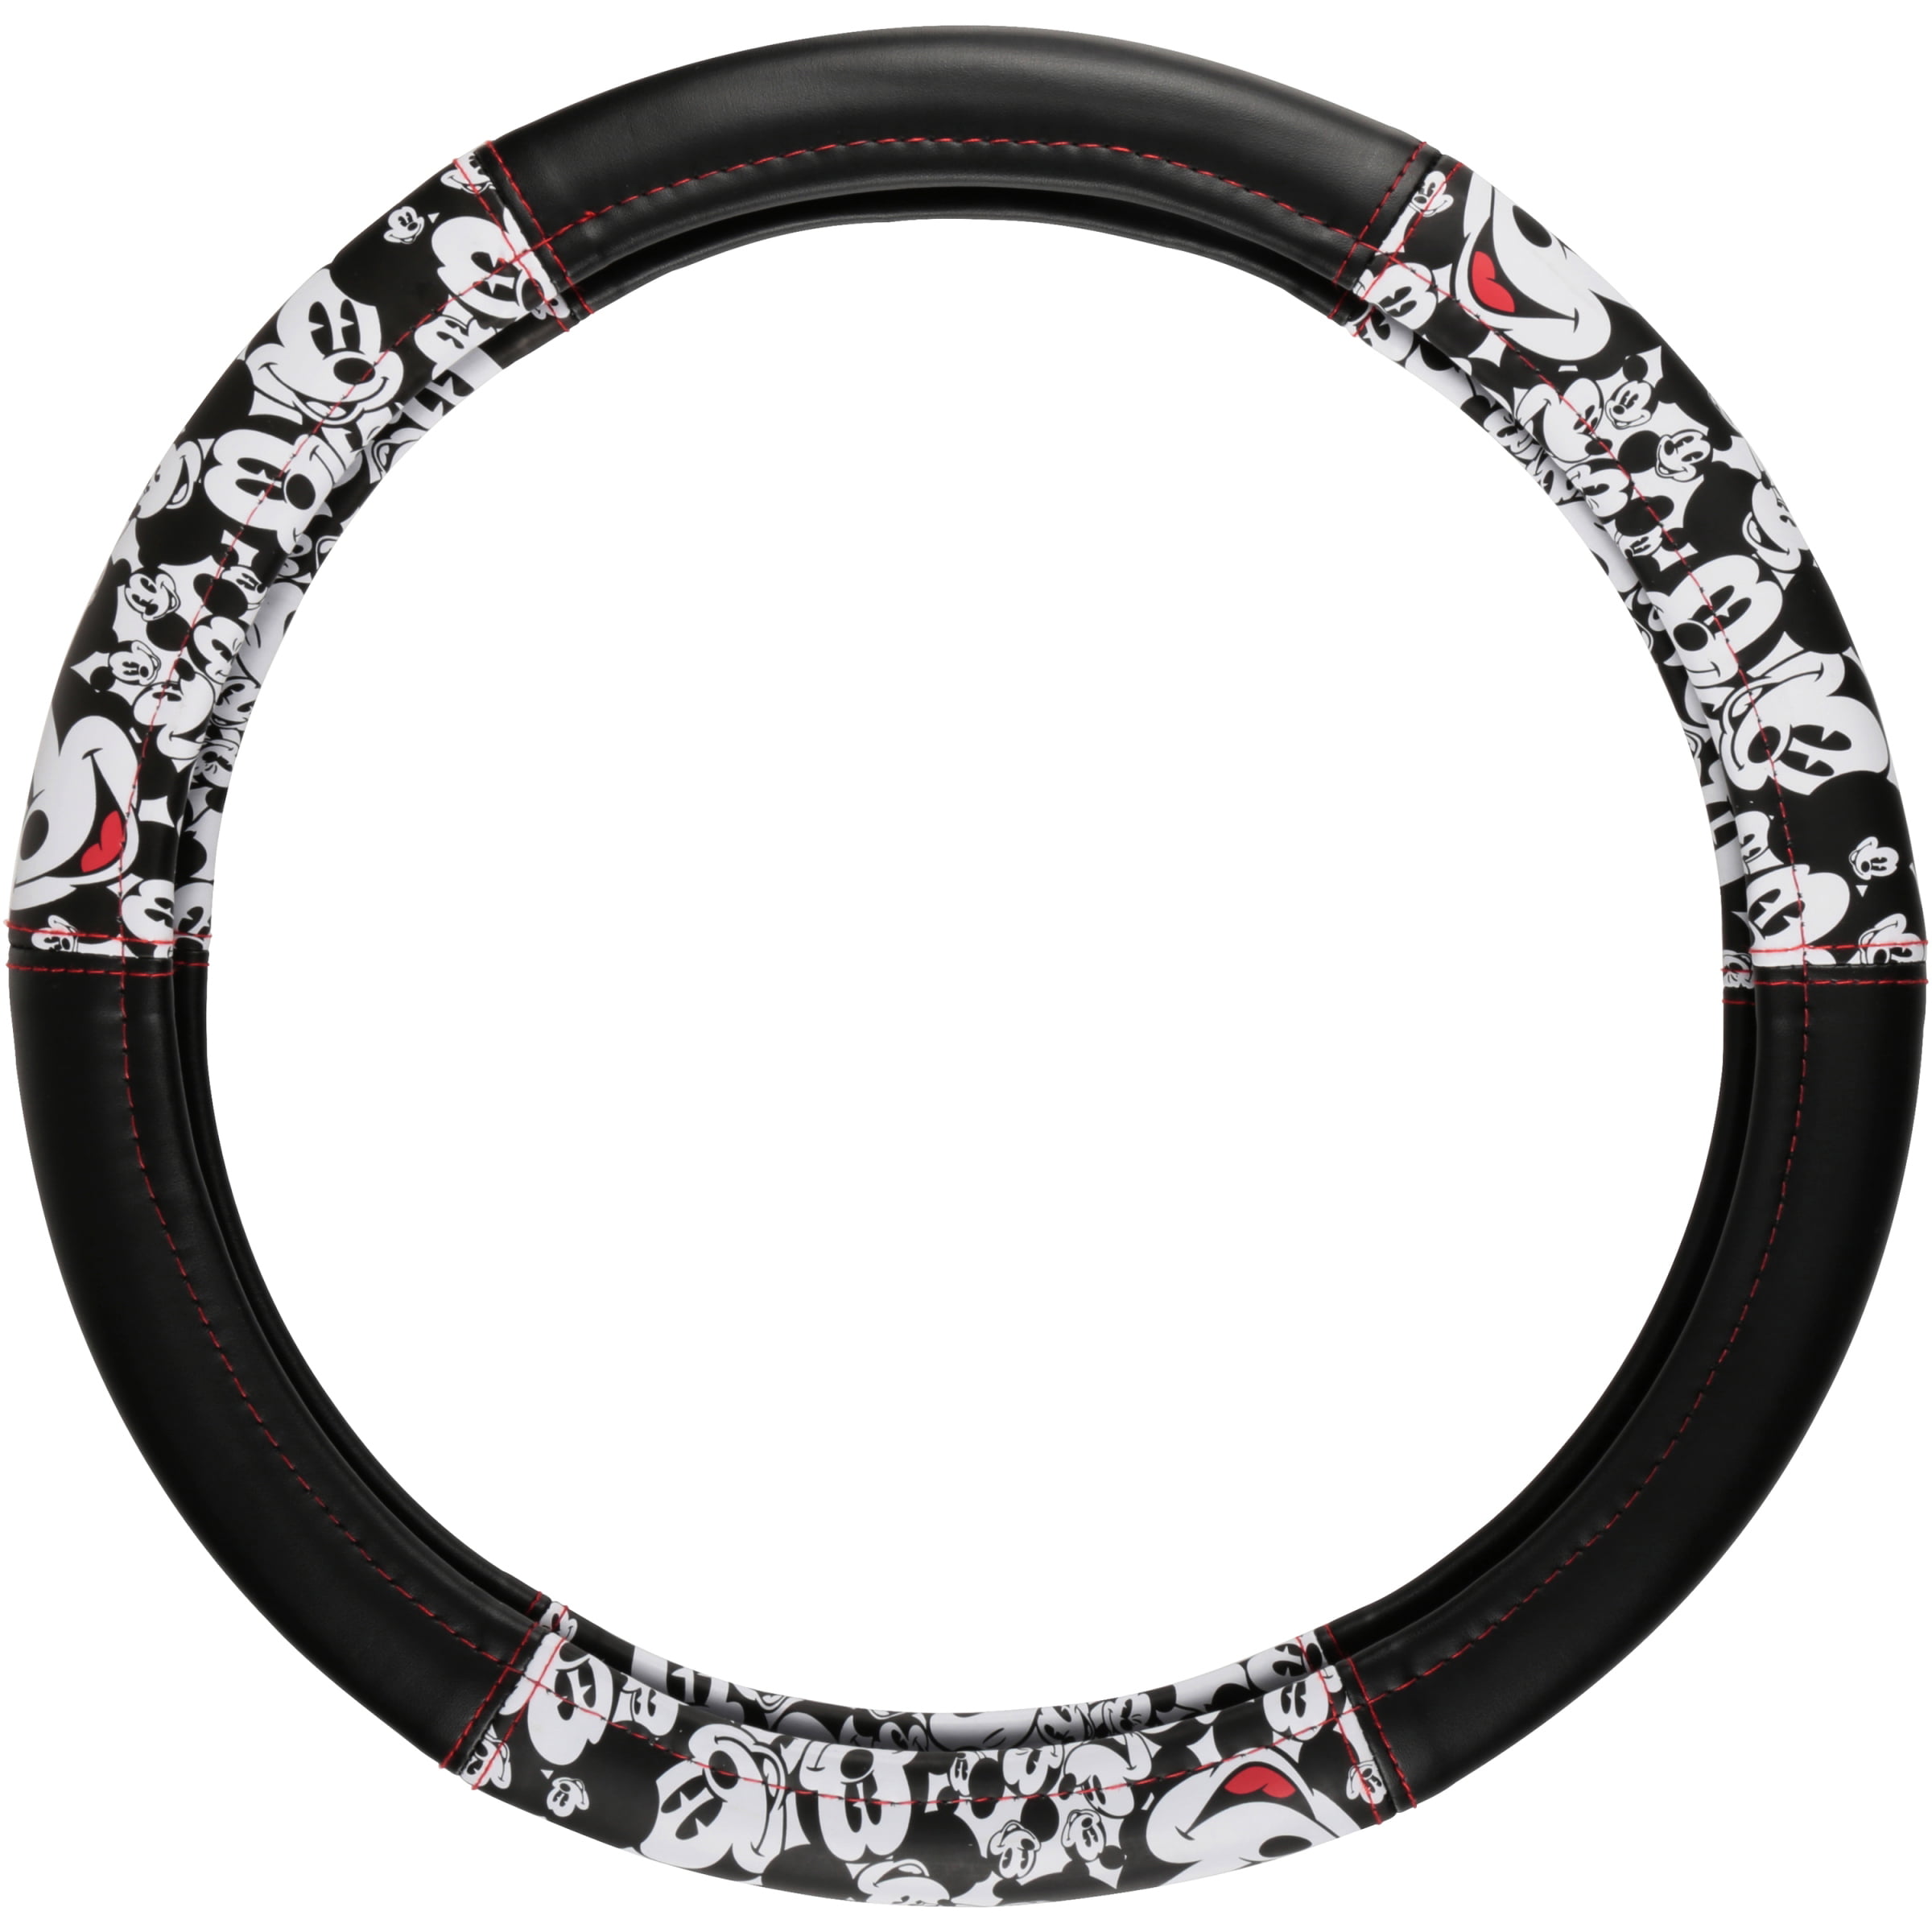 Disney Mickey Expressions Premium Speed Grip Leather Steering Wheel Cover 